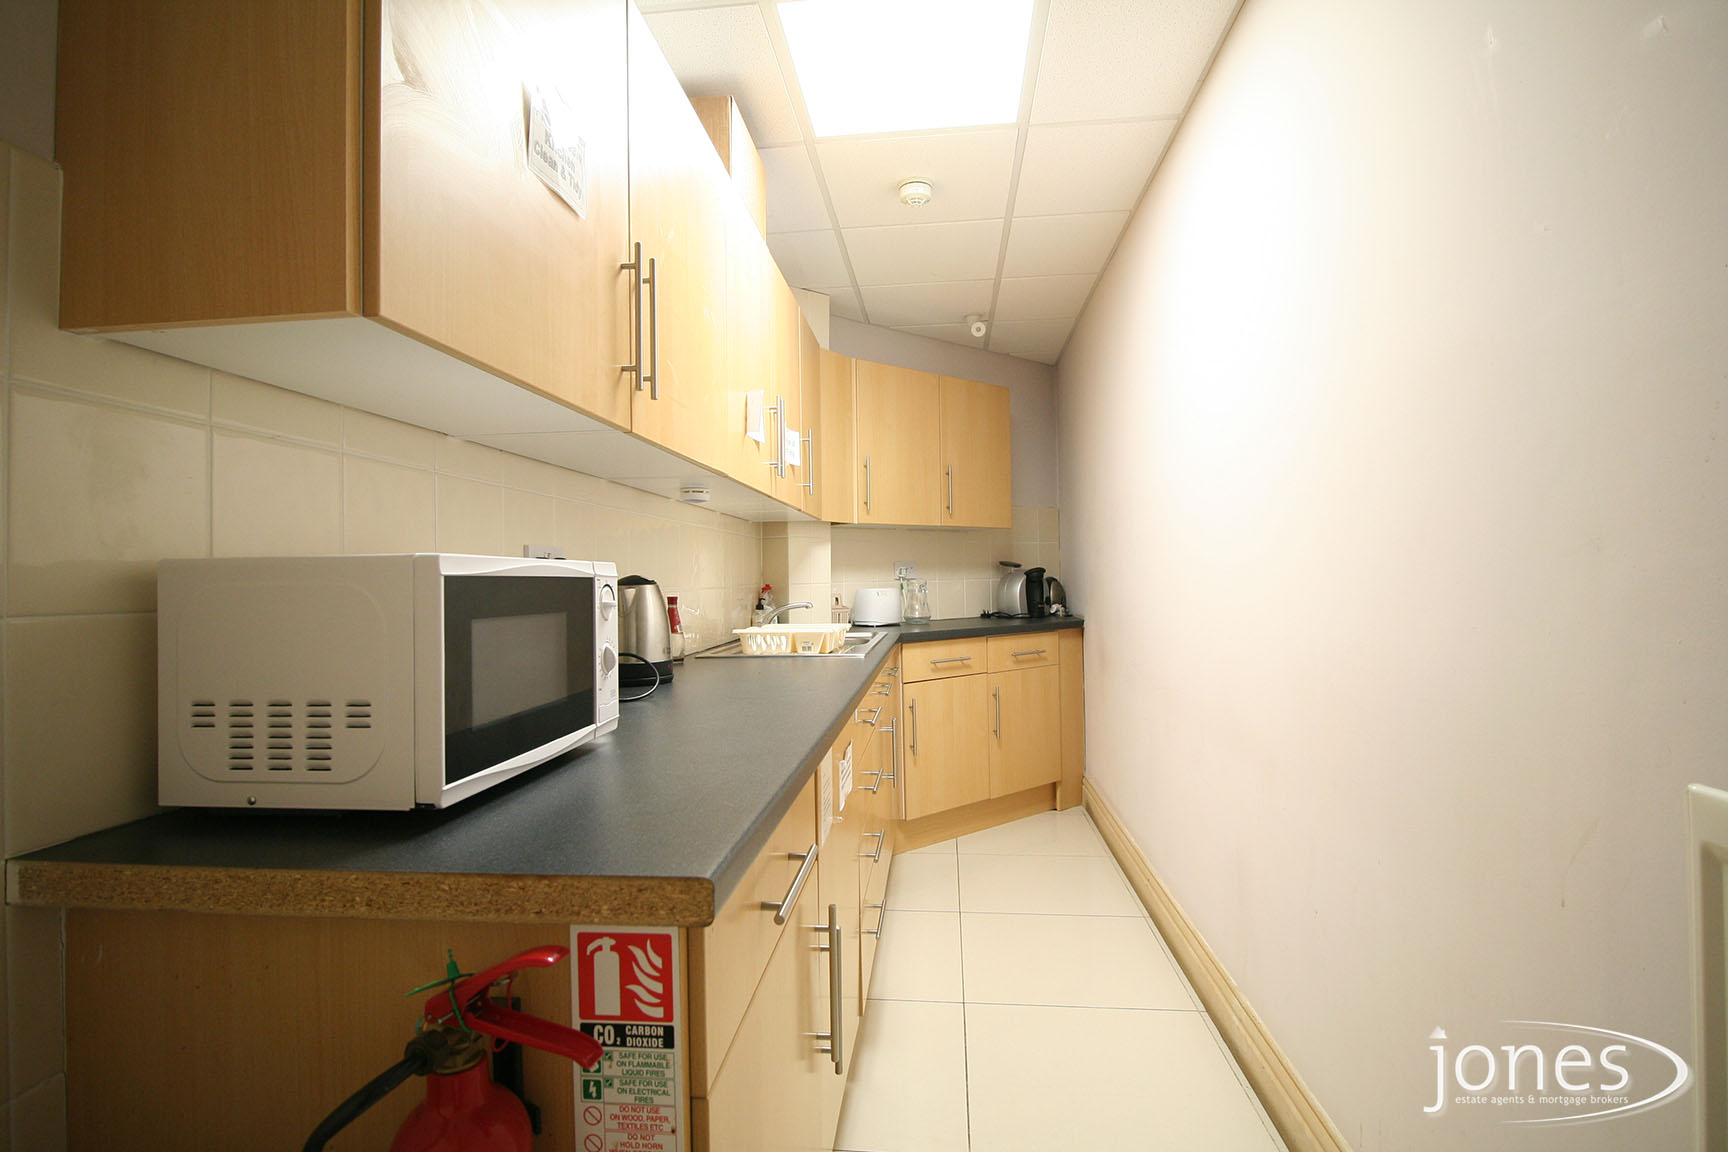 Home for Sale Let - Photo 06 Durham Tees Valley Business Centre,Orde Wingate Way,Stockton on Tees, TS19 0GD